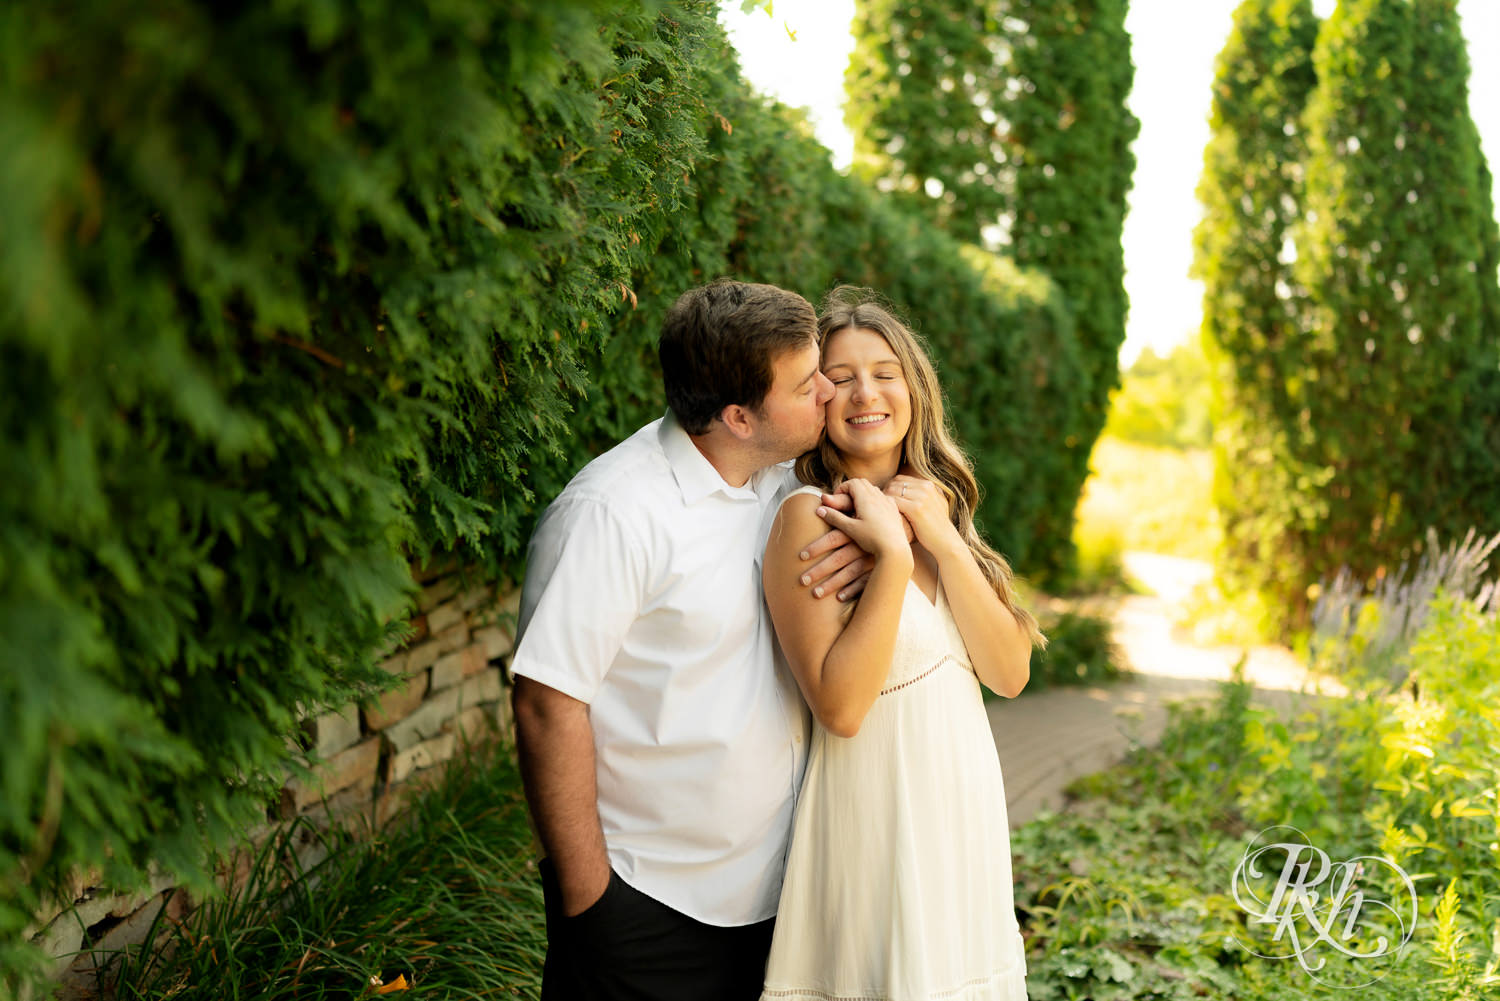 Man and woman in white dress kiss during engagement photography at Centennial Lakes Park in Edina, Minnesota.